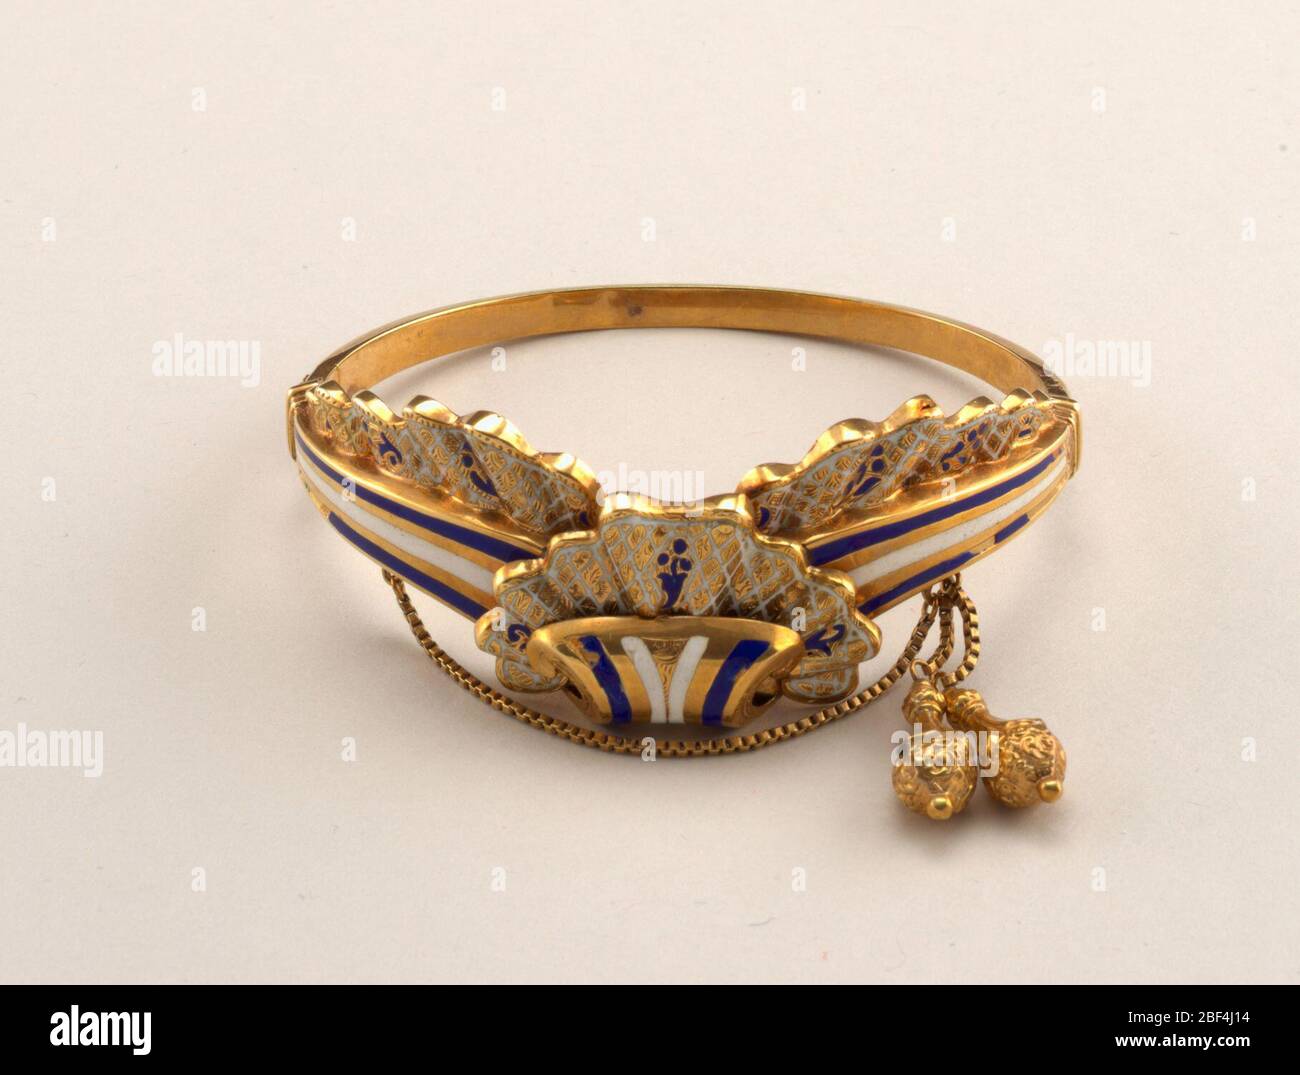 Bracelet. Hinged bracelet with clasp; design of scroll and lace frills; fine chain with two gold pendants. Stock Photo